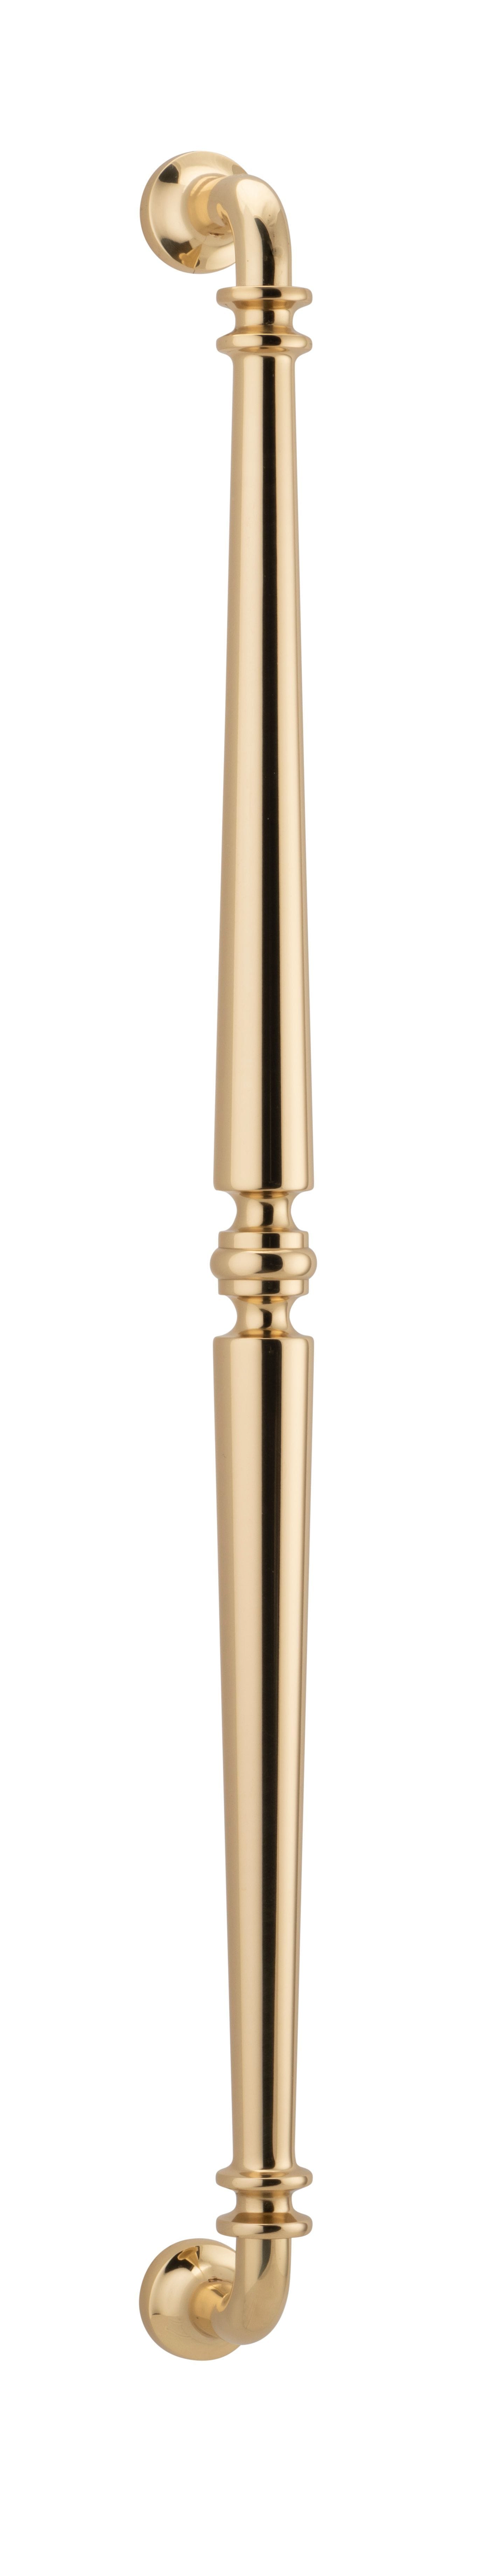 Sarlat Pull Handle Polished Brass 600mm